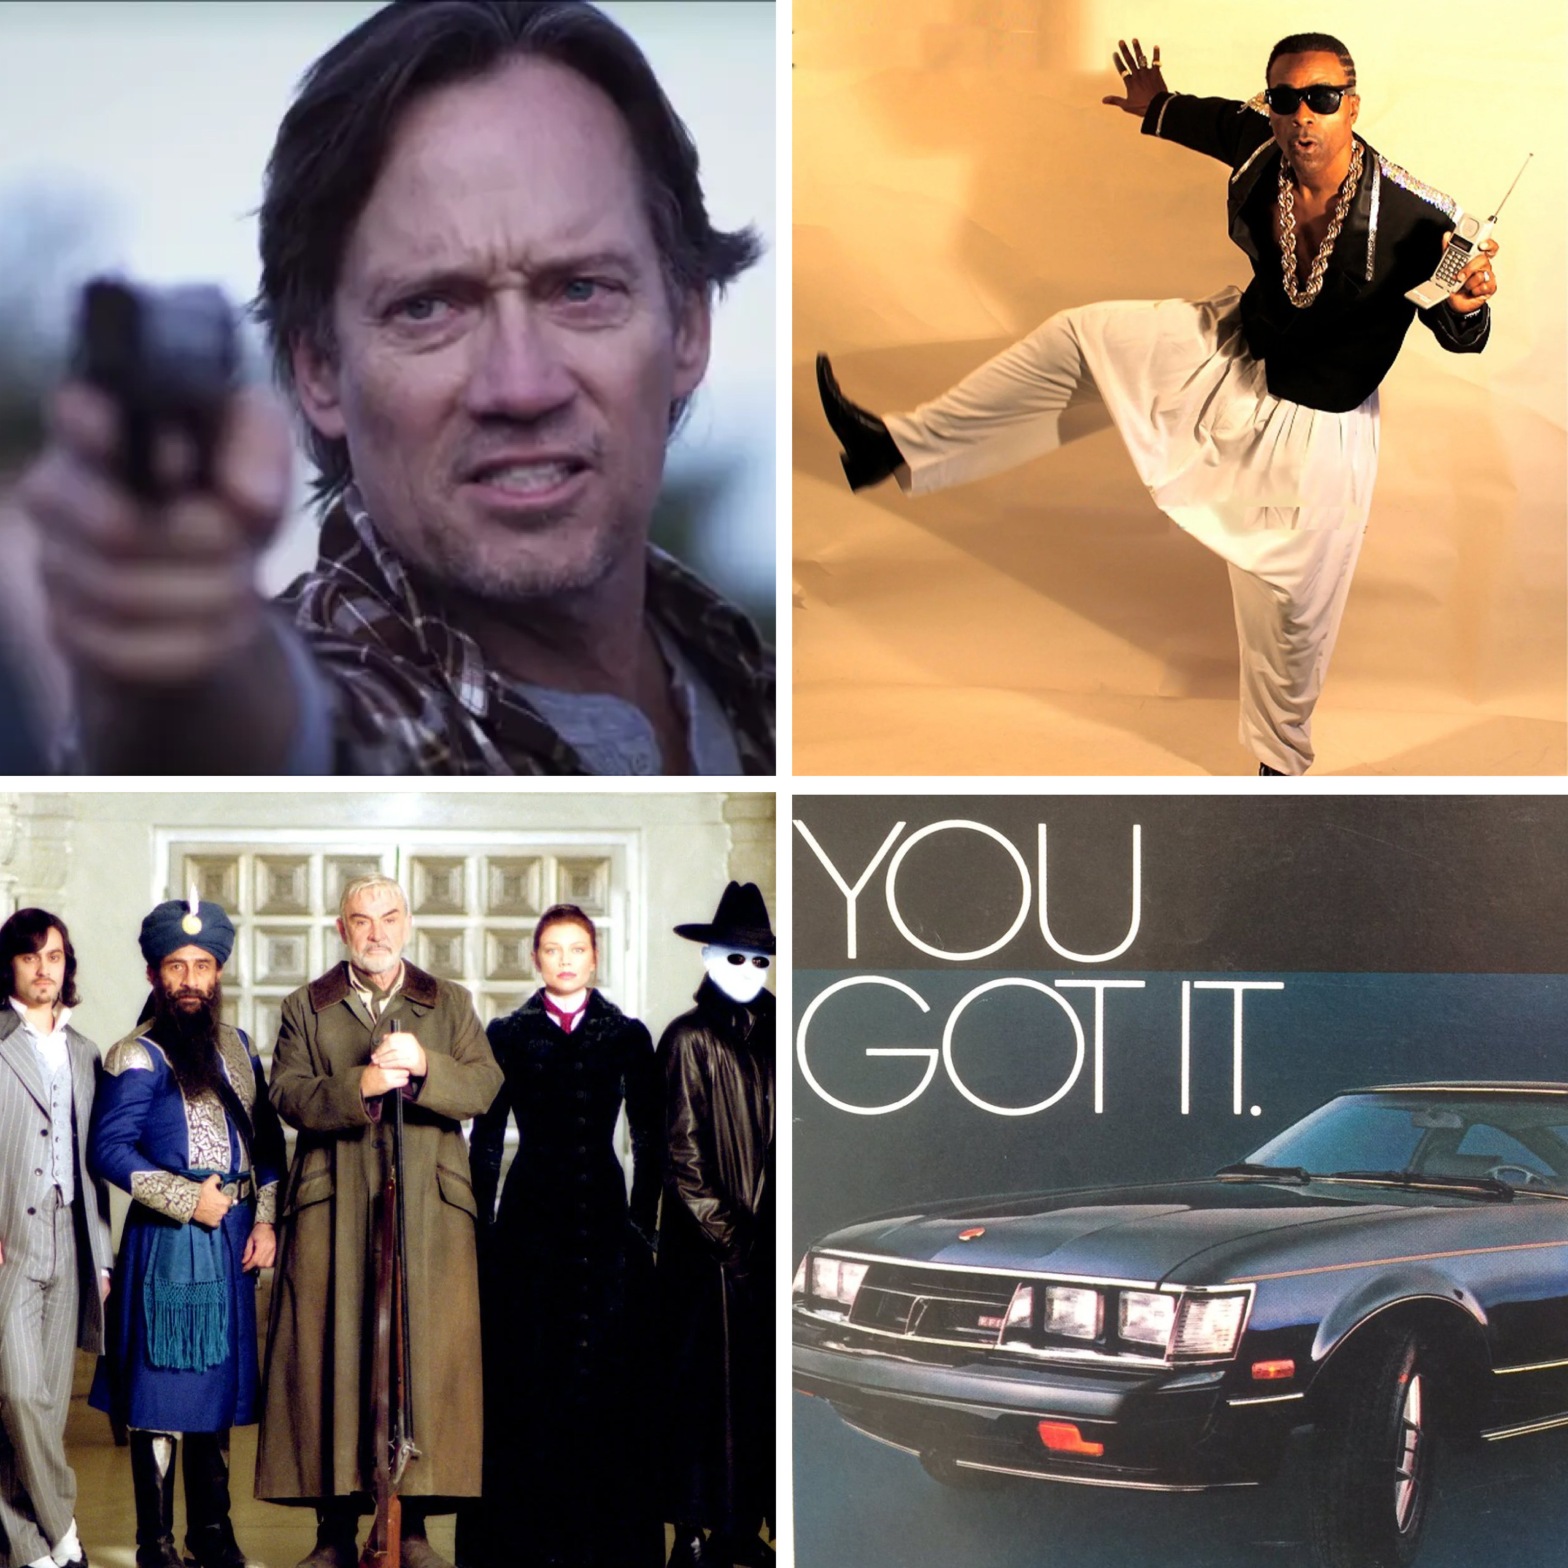 Kevin Sorbo in some gun propaganda bullshit, MC Hammer and his pants, The League of Extraordinary Gentlemen, and a Toyota ad.